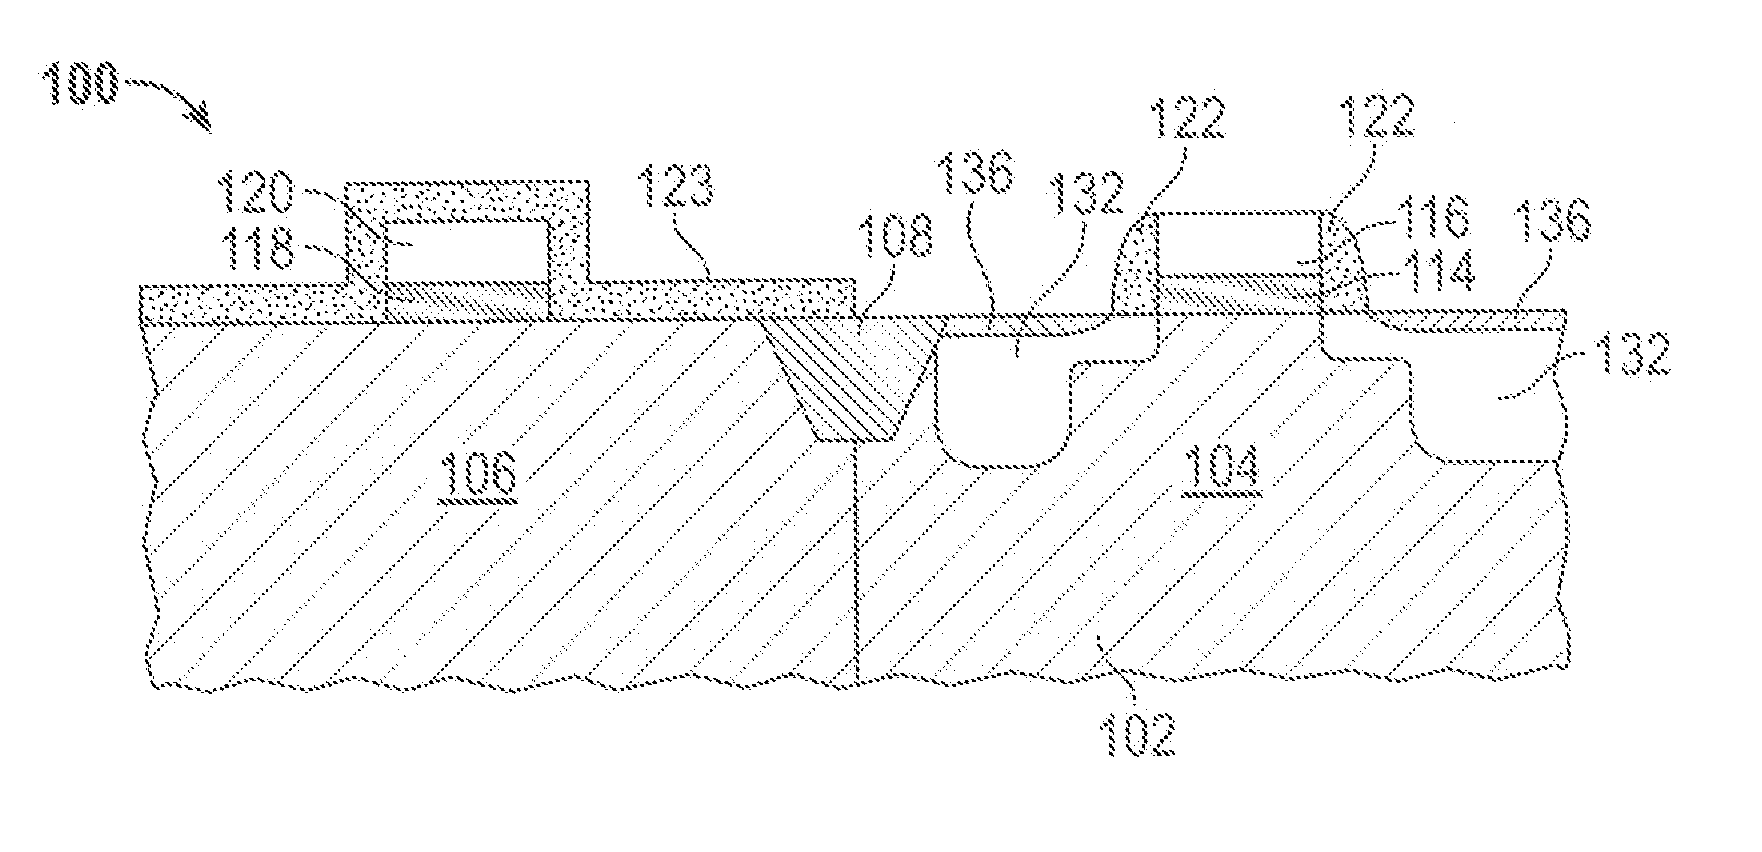 Semiconductor device fabrication methods